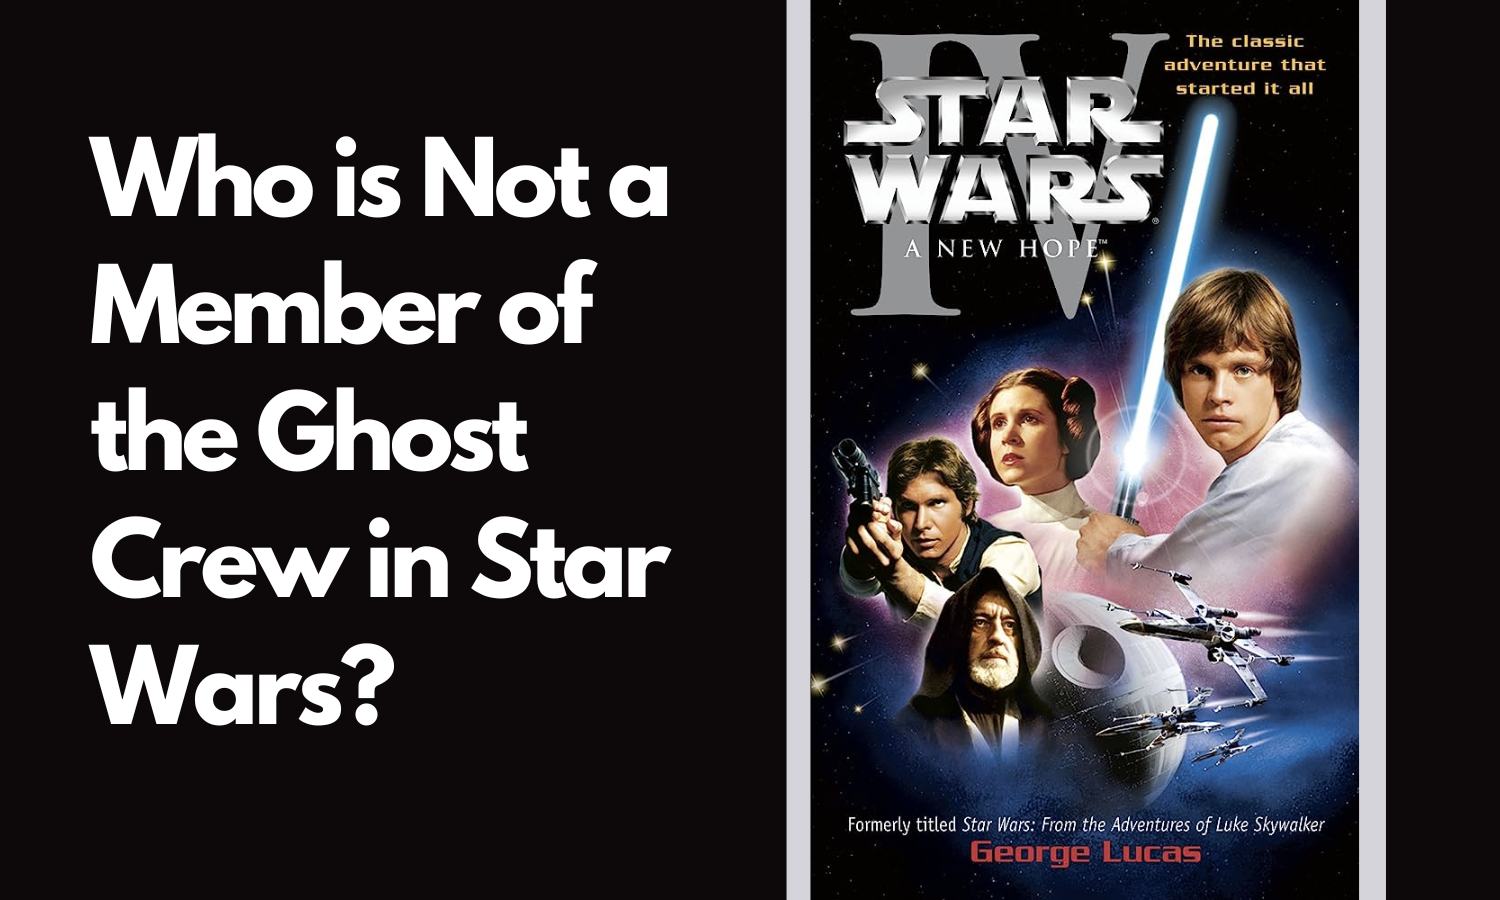 Who is Not a Member of the Ghost Crew in Star Wars?